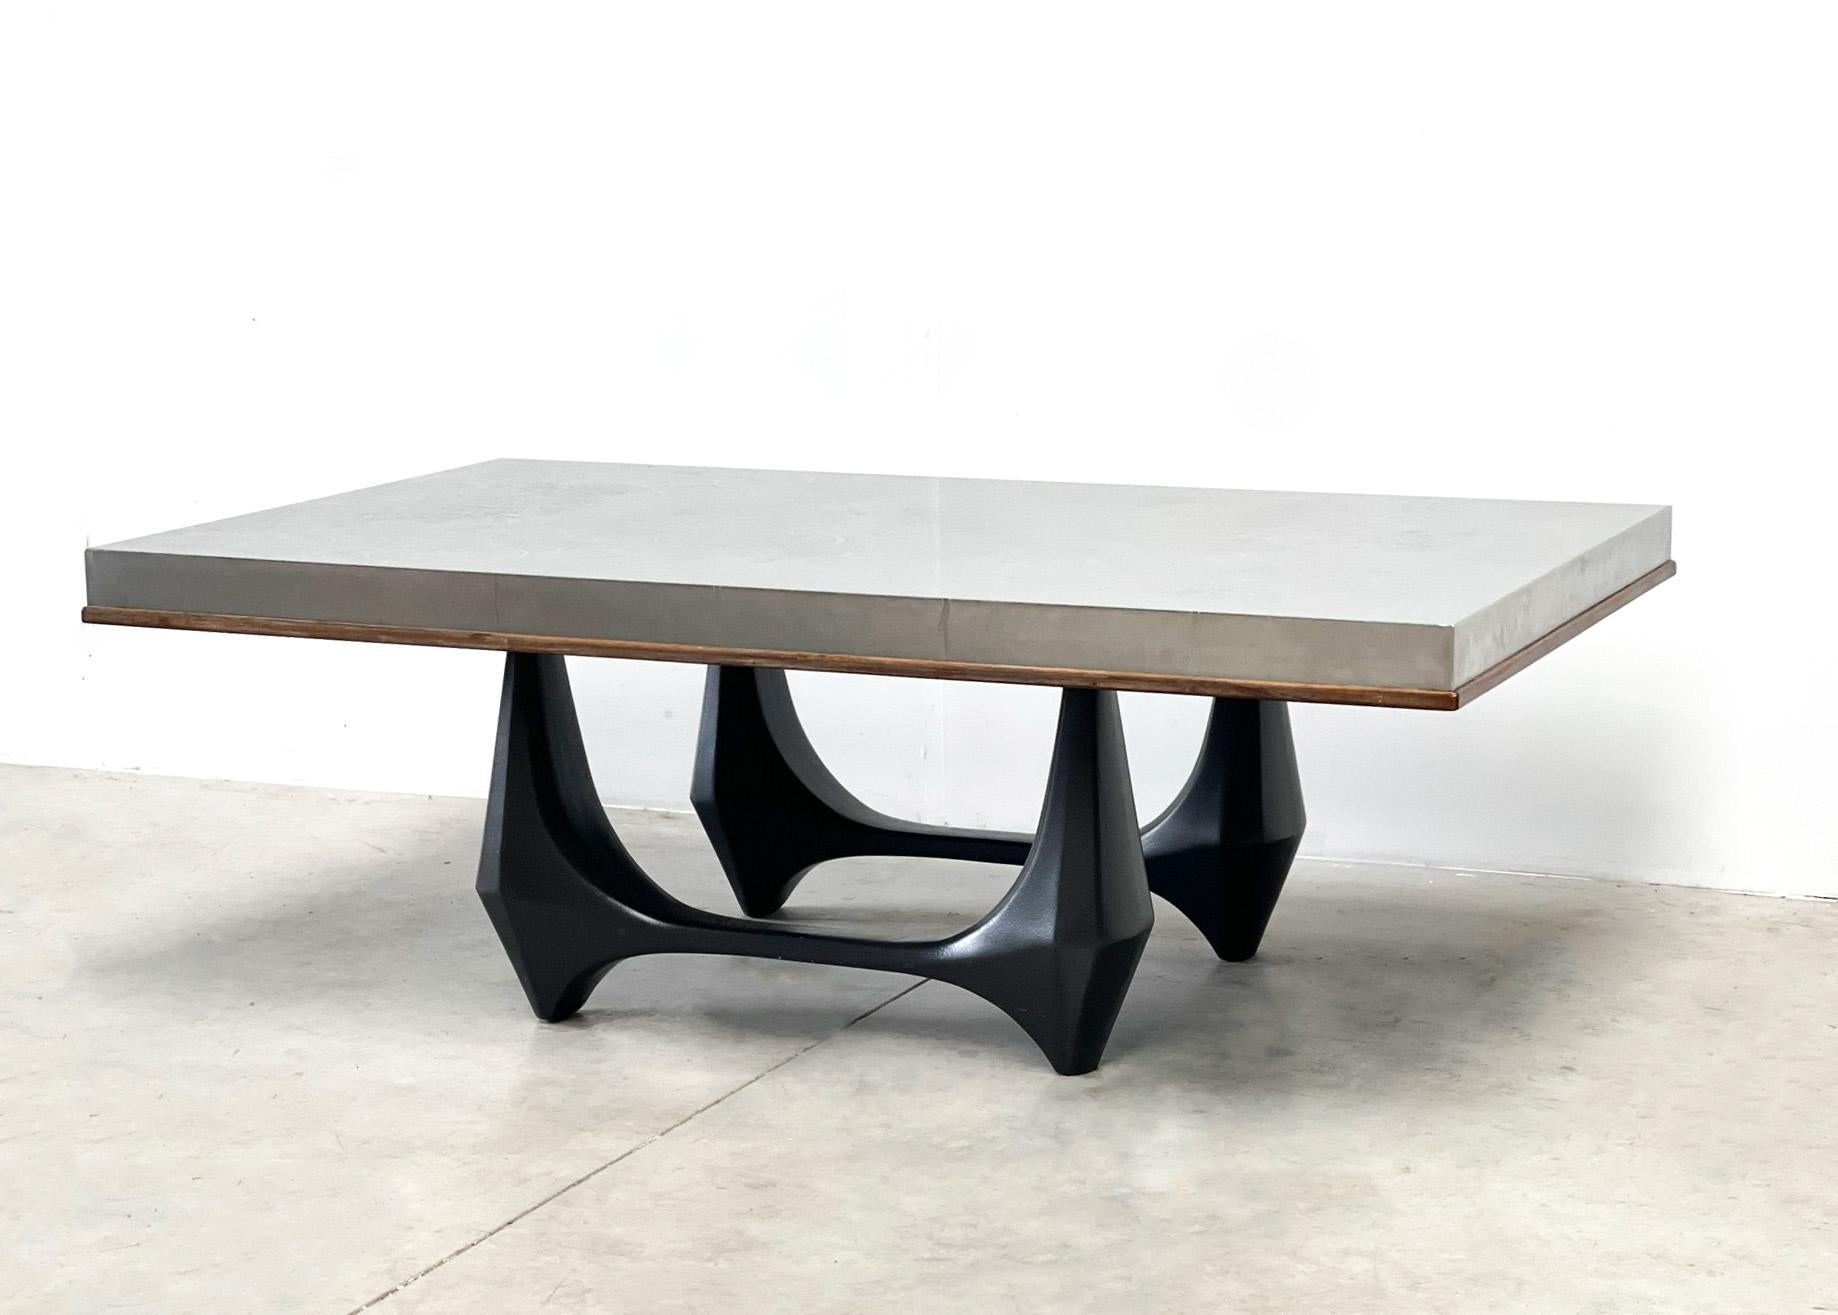 Heinz Lilienthal E6 coffee table
Very nice german coffee table by designs Heinz Lilienthal. This coffee table was made and sold in the 1970s in Germany. The table stands out because of the aluminum edged coffee table top and black base. This model